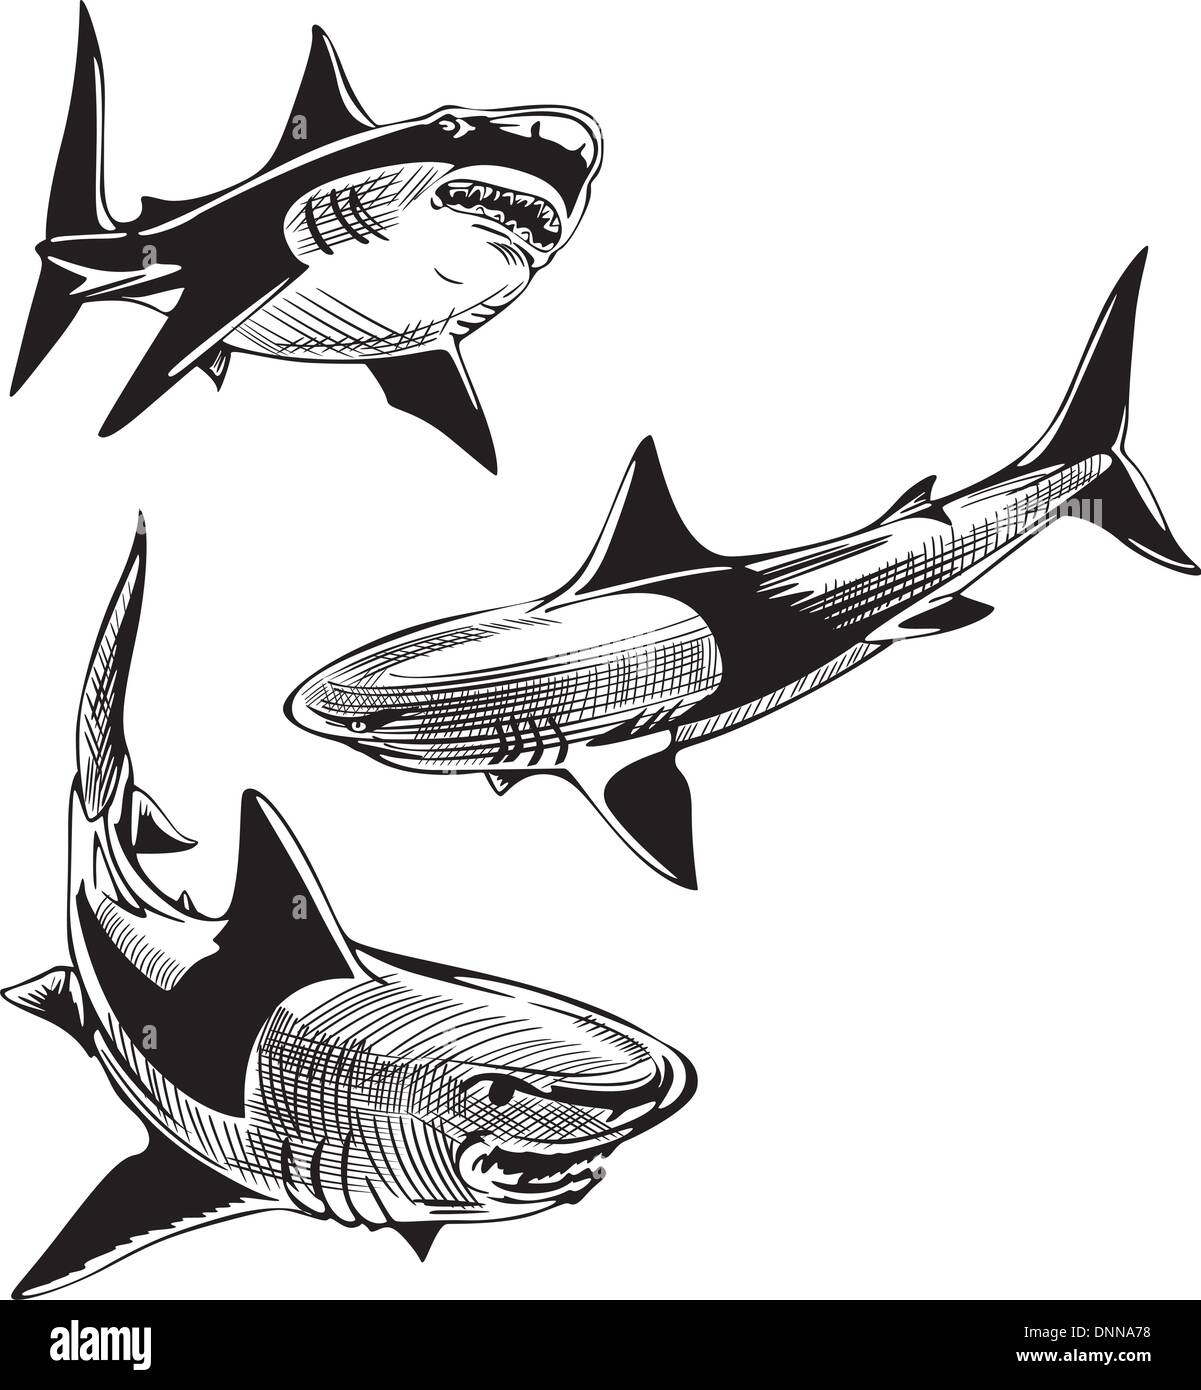 Three sharks. Set of black and white vector illustrations. Stock Vector